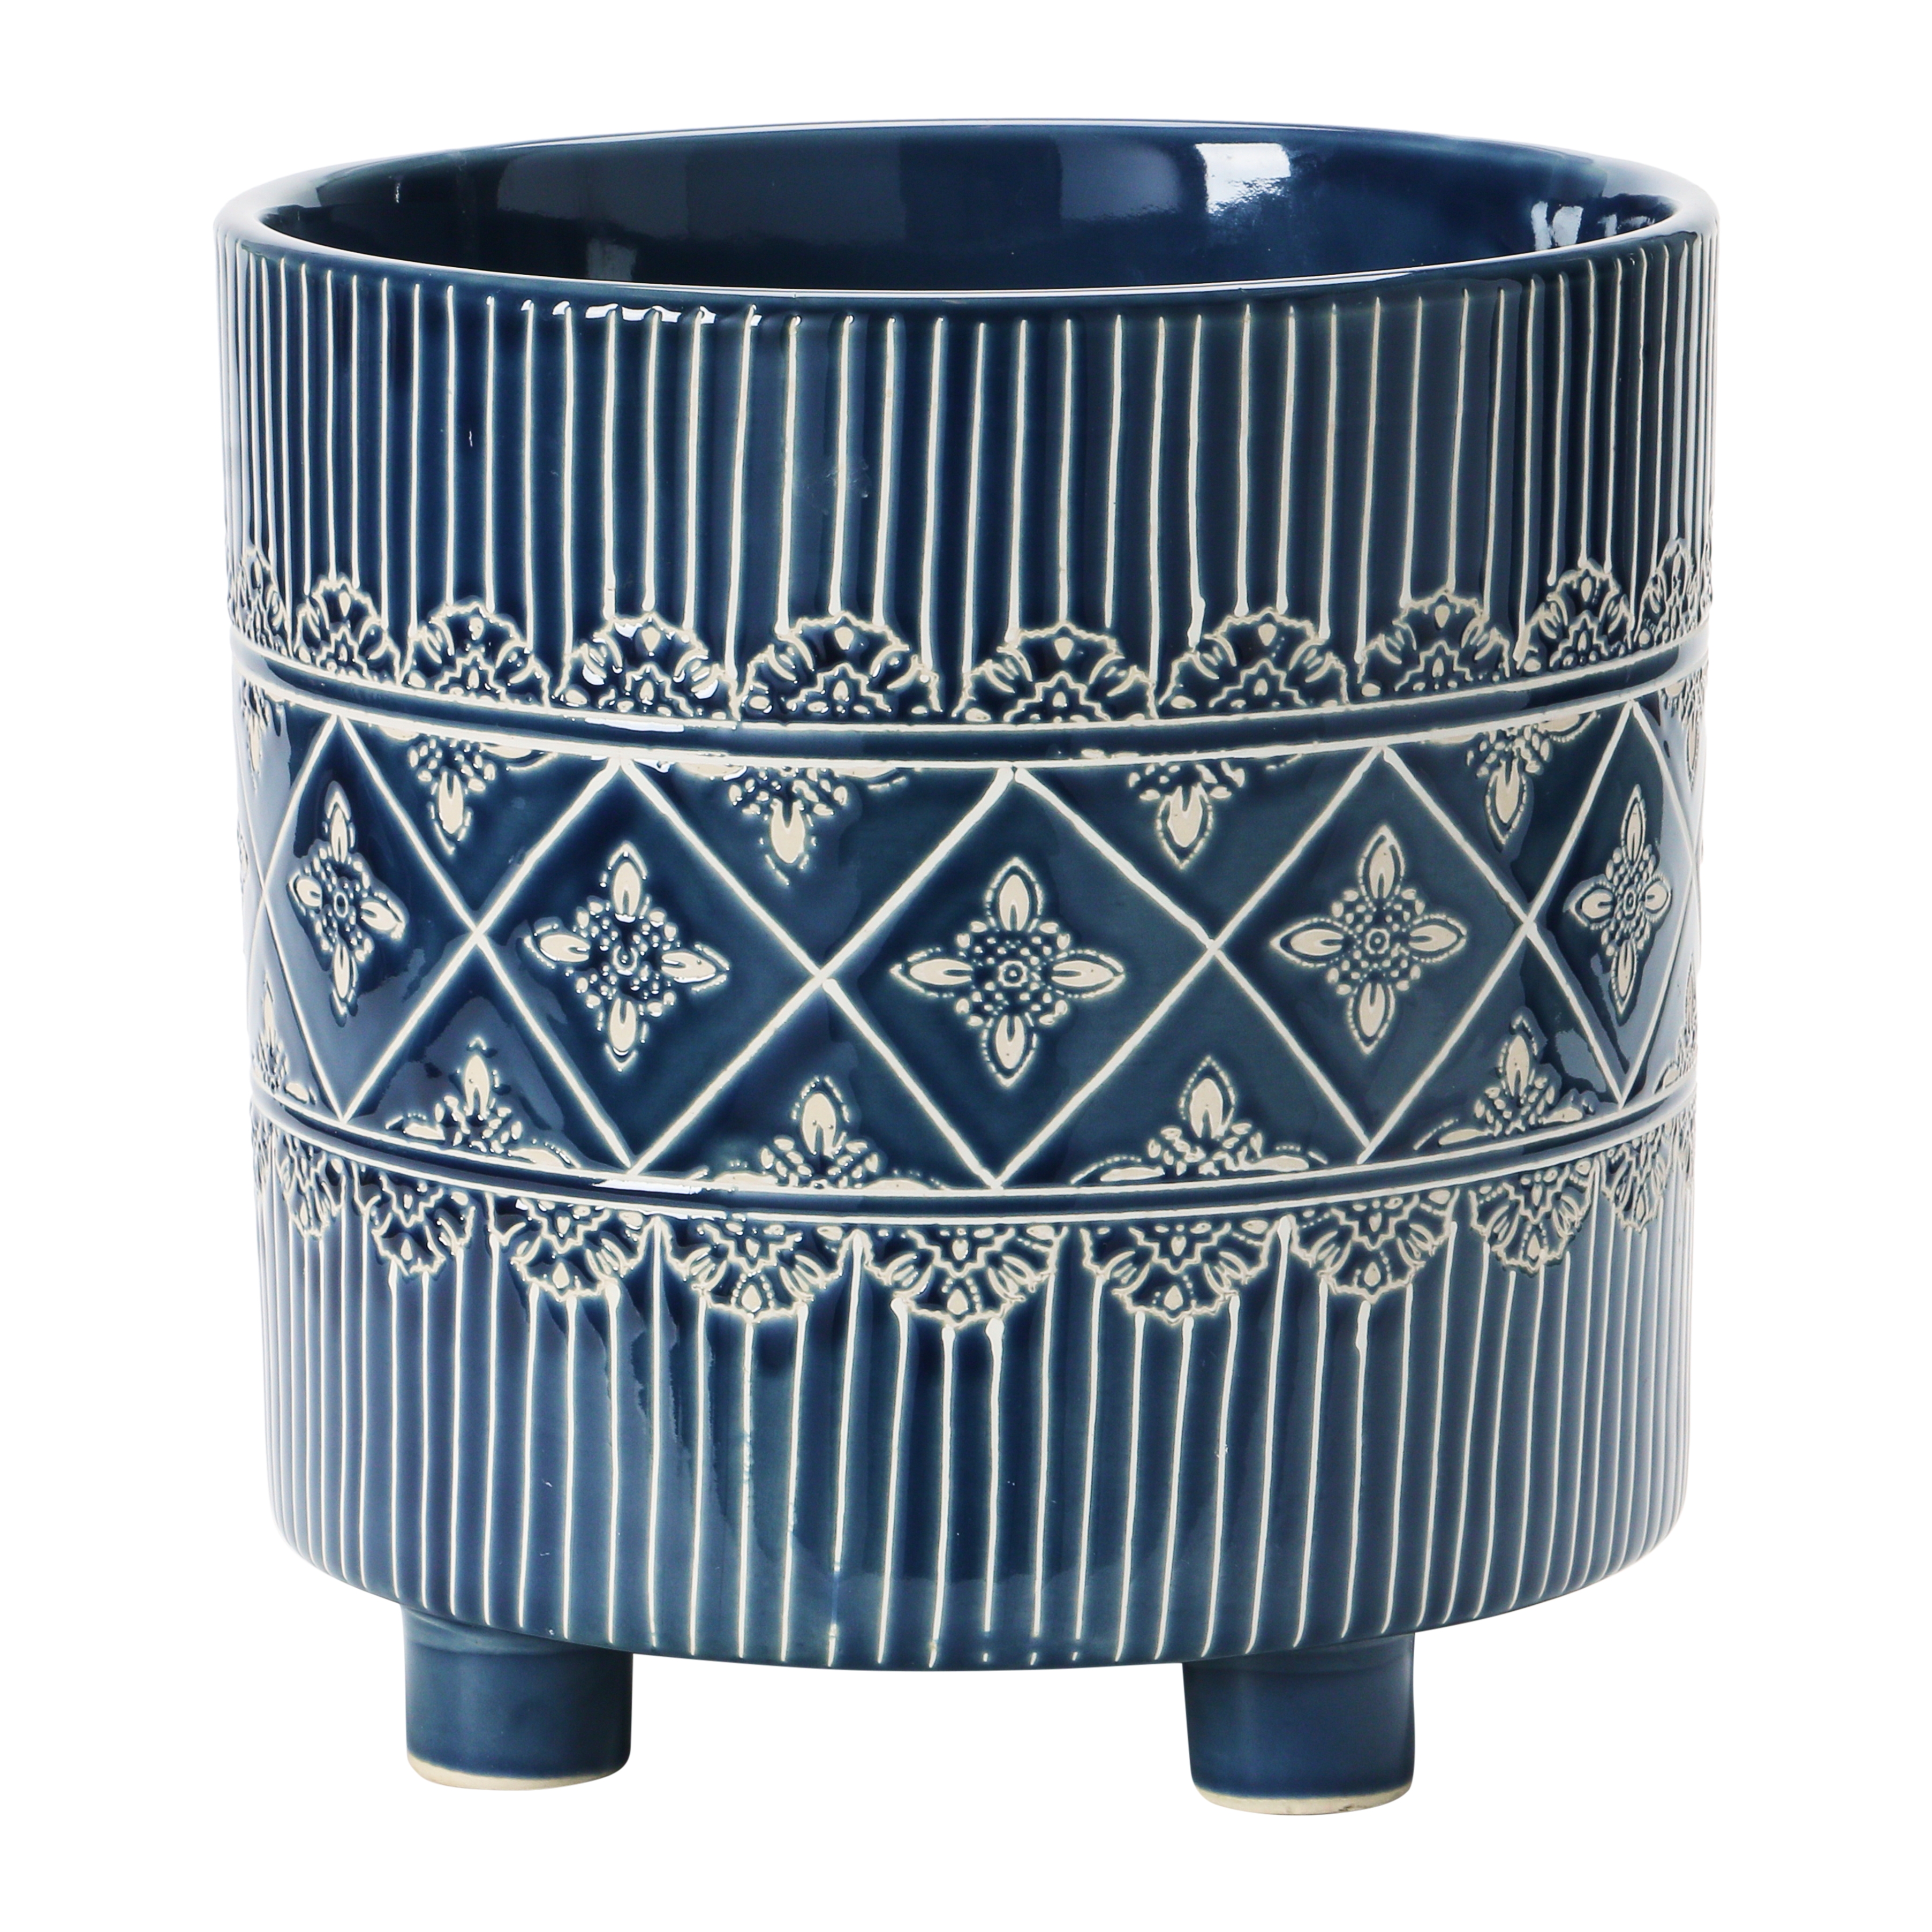 Debossed Stoneware Footed Planter with Pattern, Blue & White (Holds 9" Pot) - Image 0